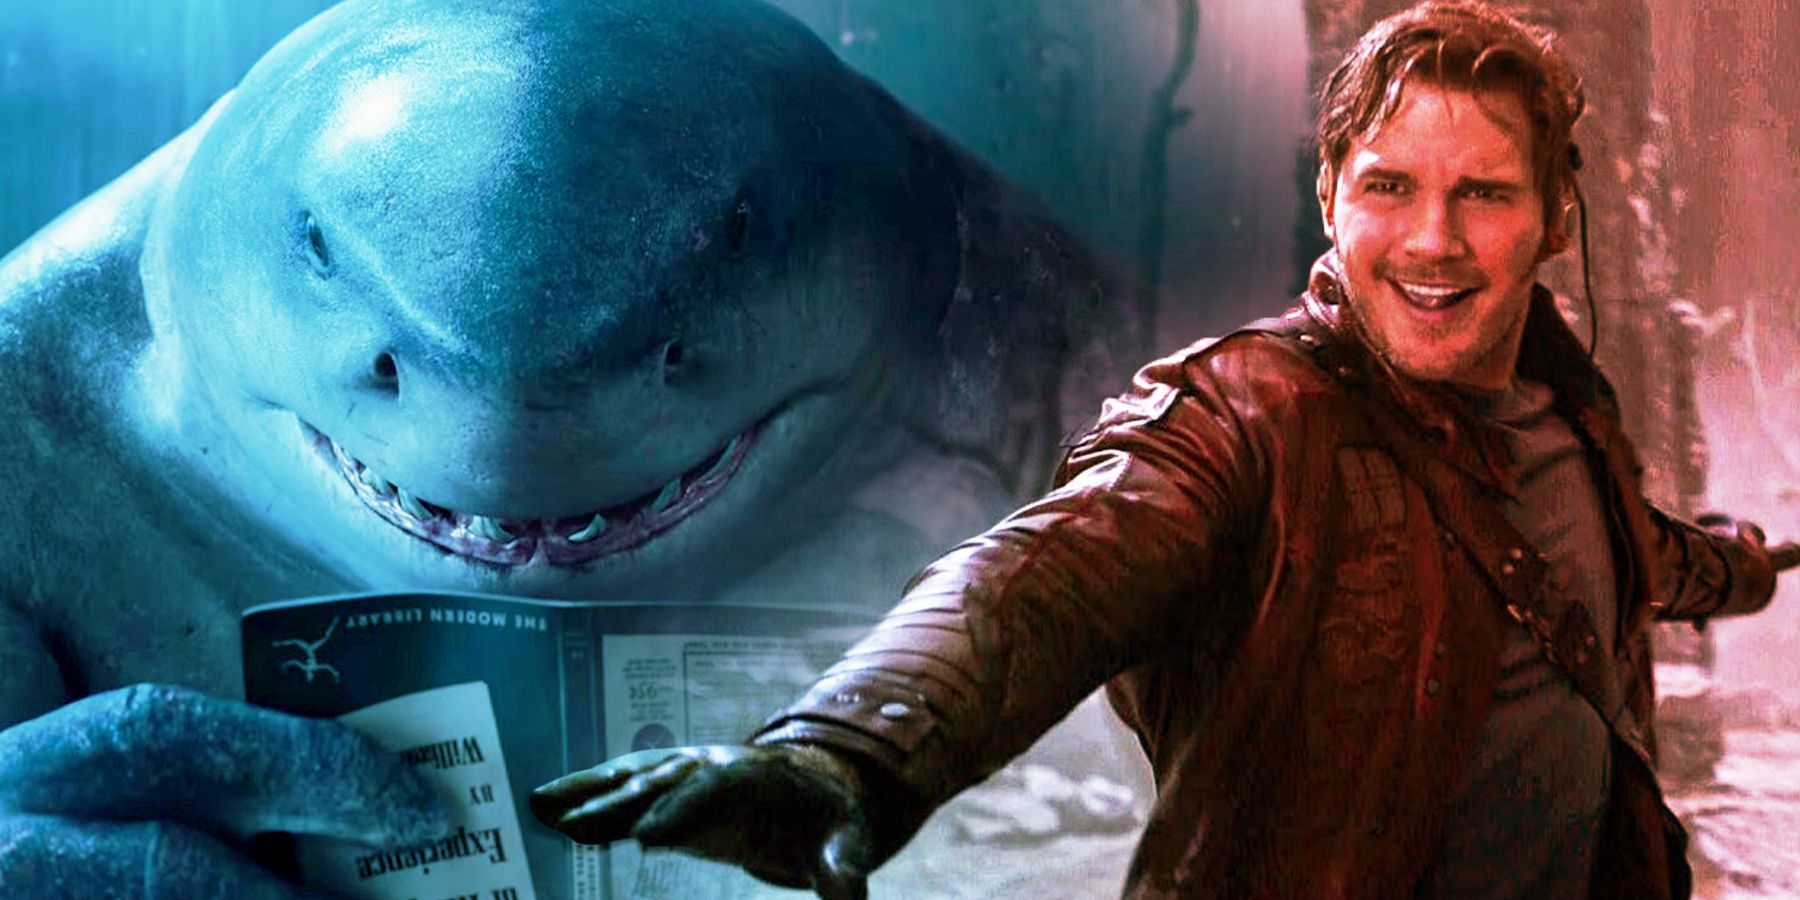 King Shark from James Gunn's Suicide Squad and Starlord from Guardians of the Galaxy